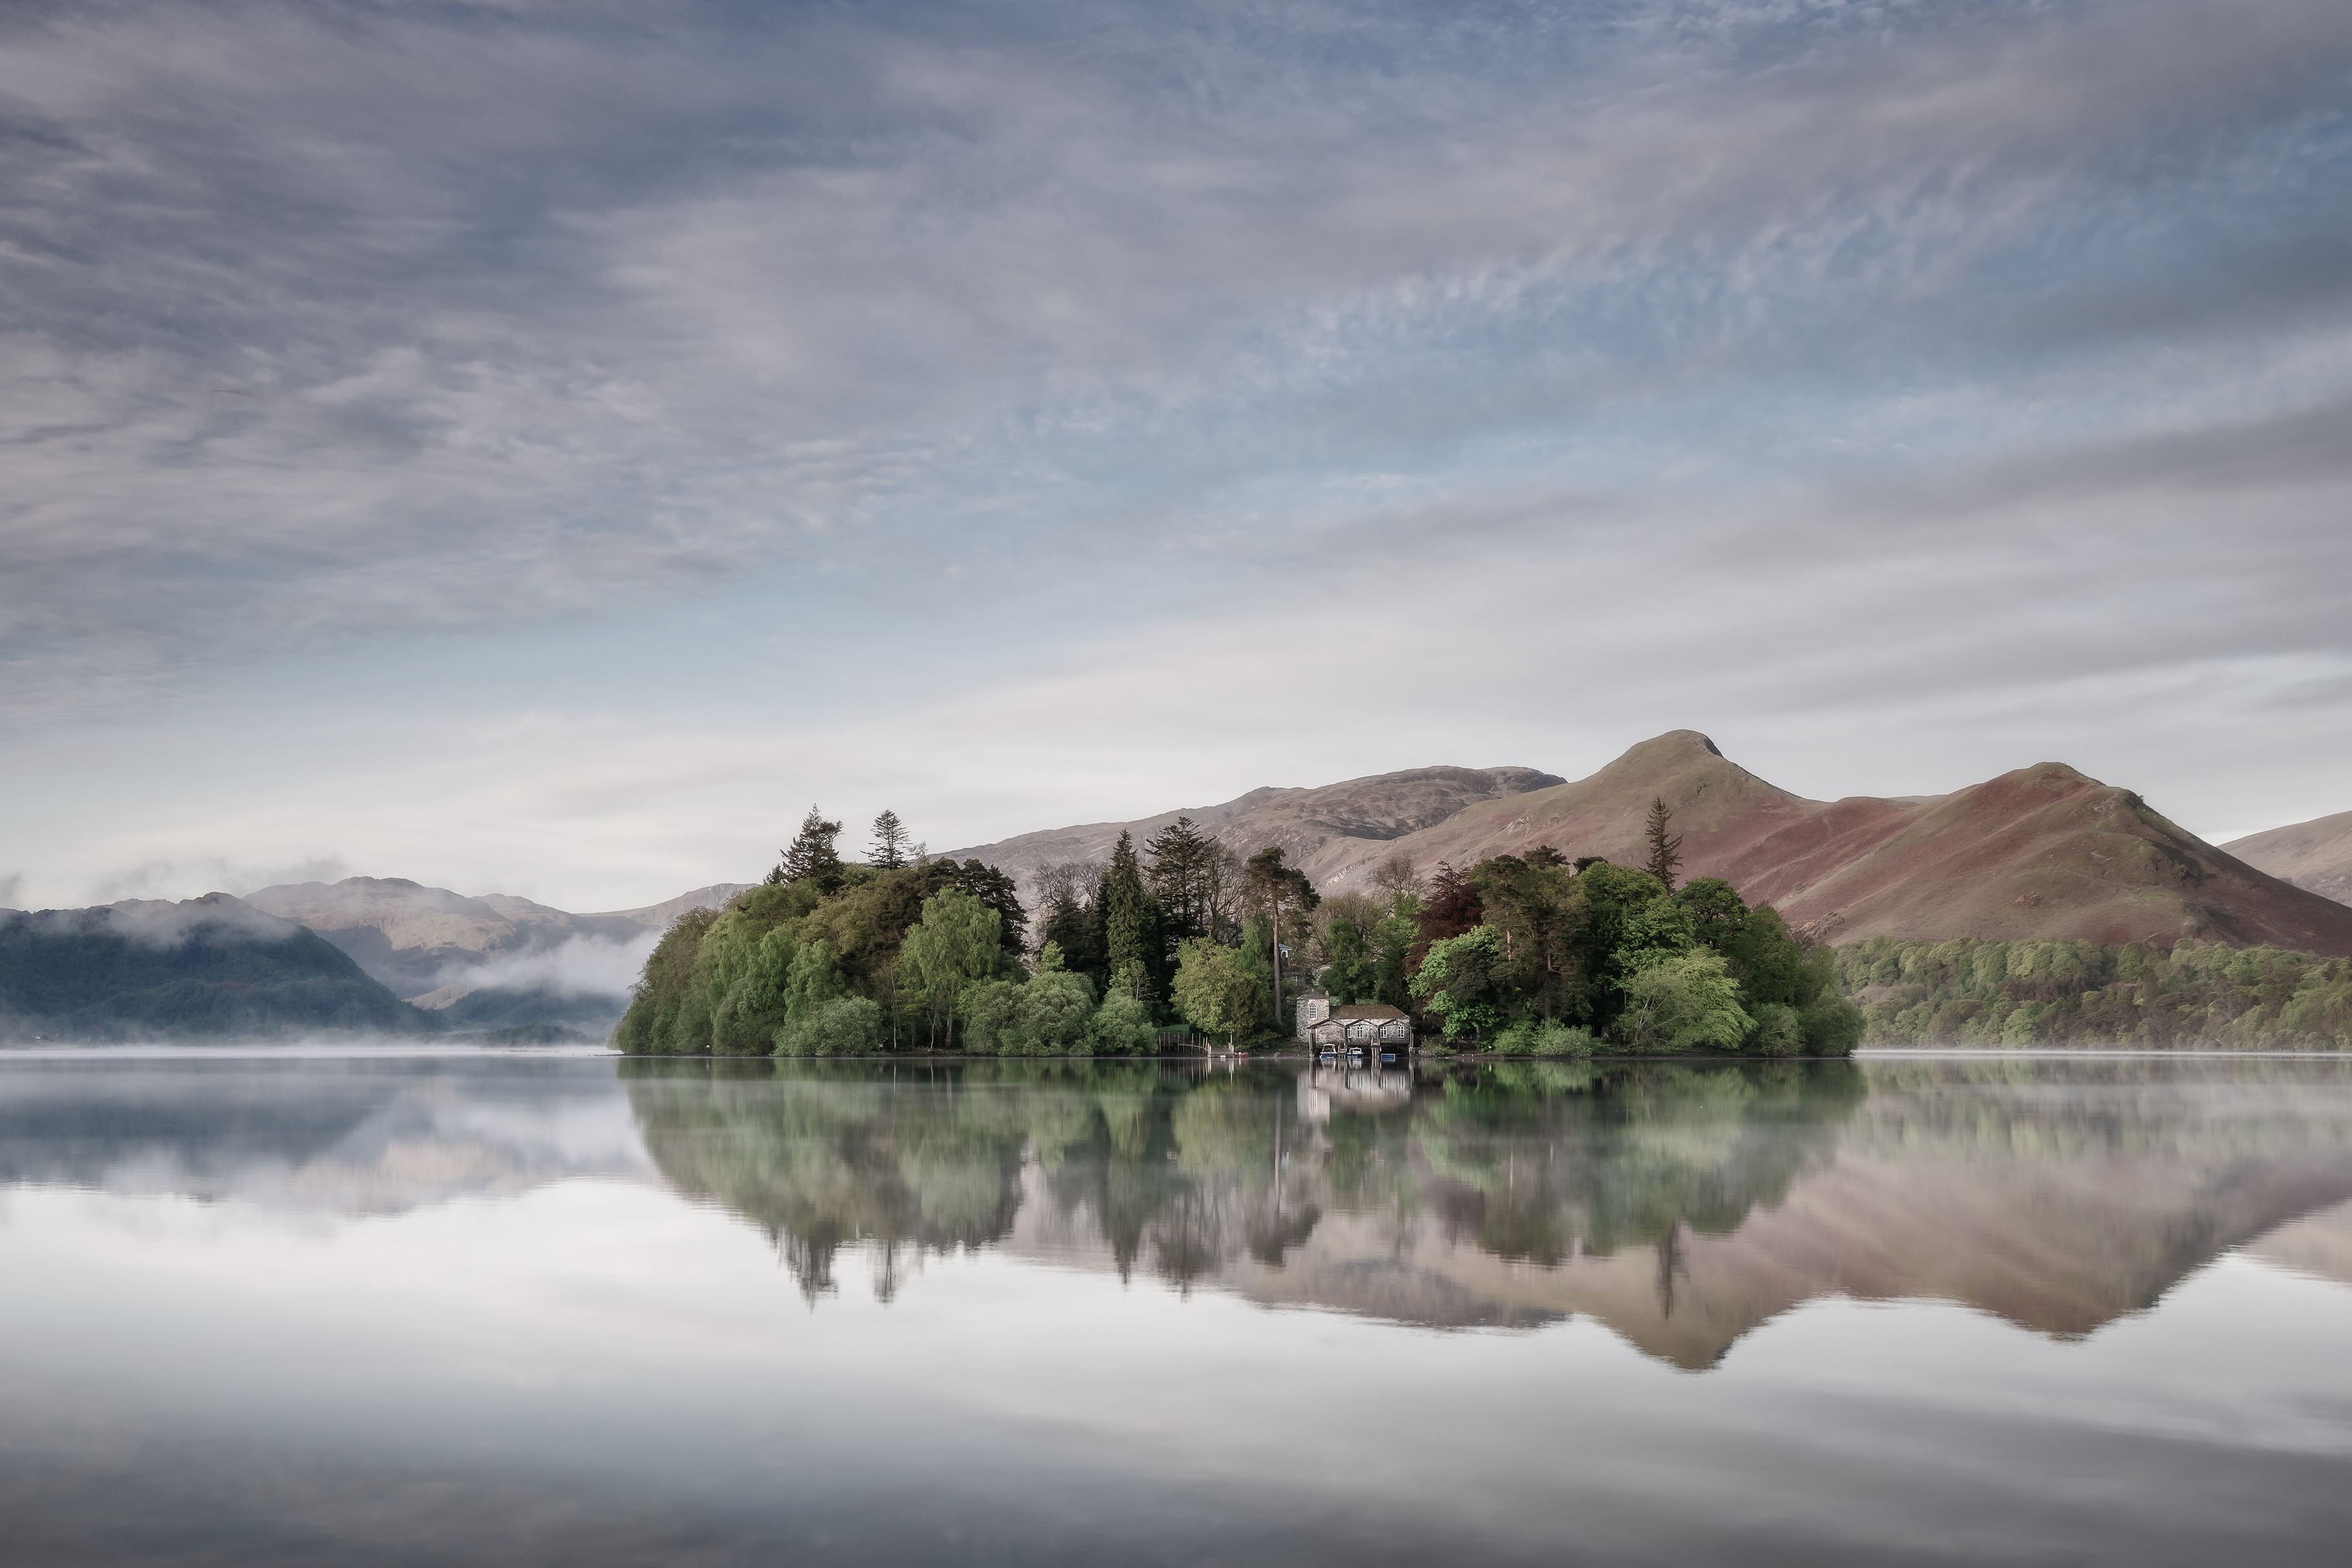 Derwent Isle House, Derwent Water, Keswick, England by Andrew Campbell